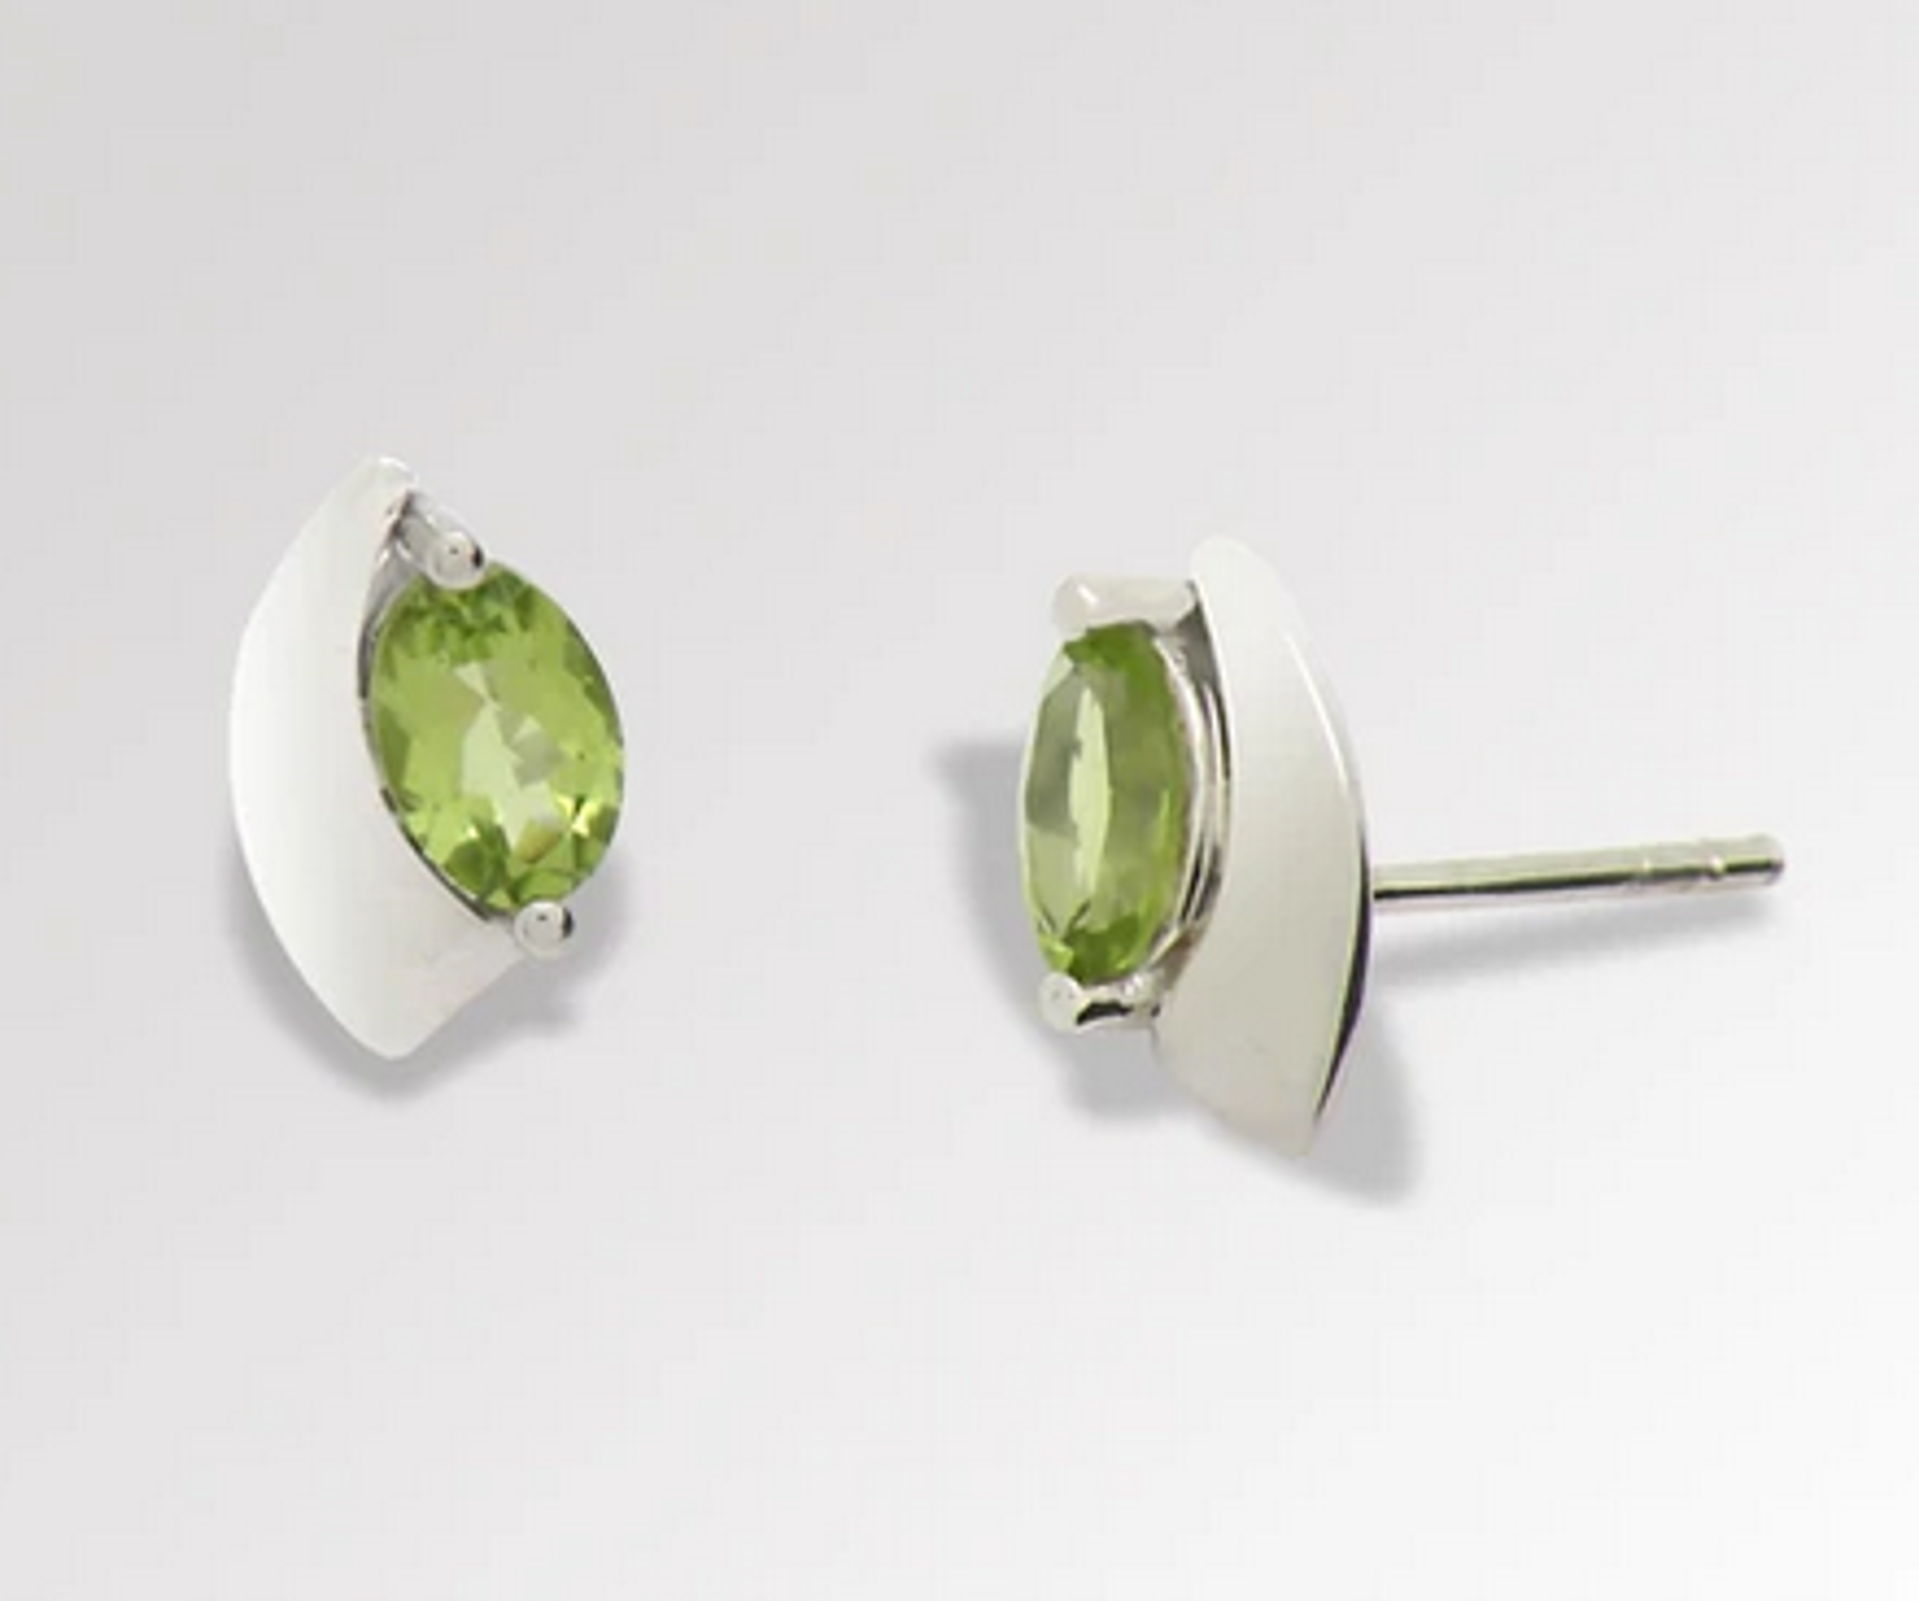 Earring - Peridot With Polished Silver Droplet  E9298P by Joryel Vera